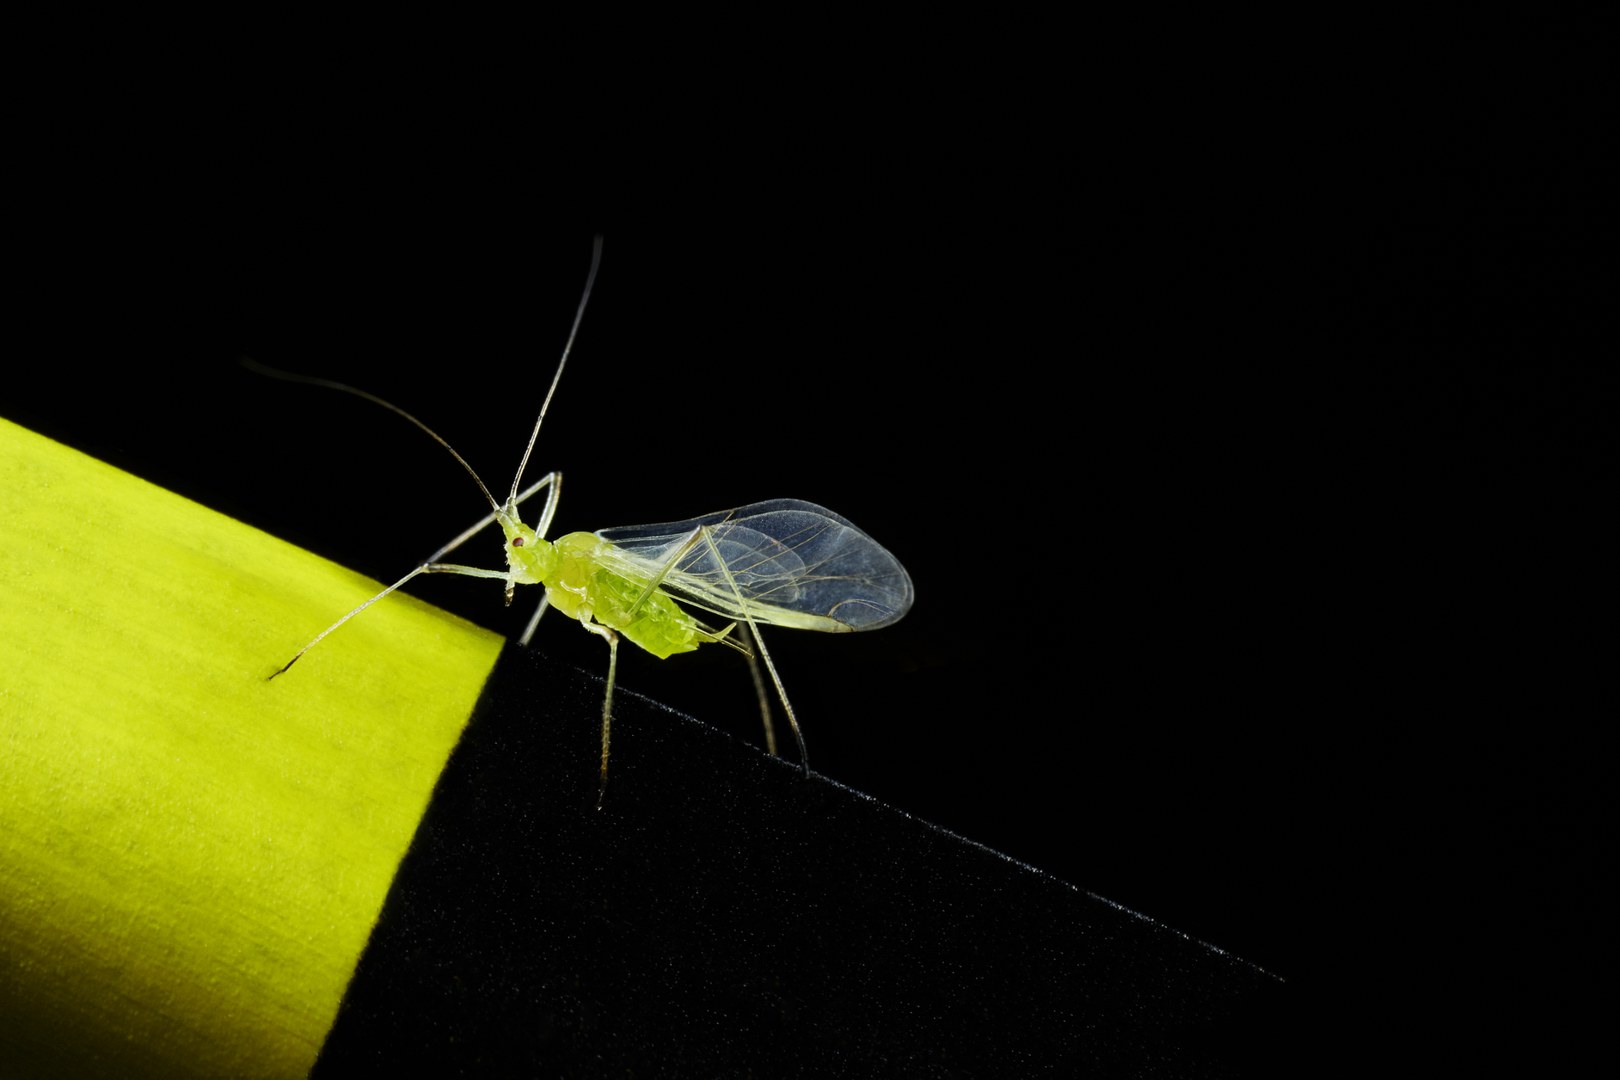 An aphid